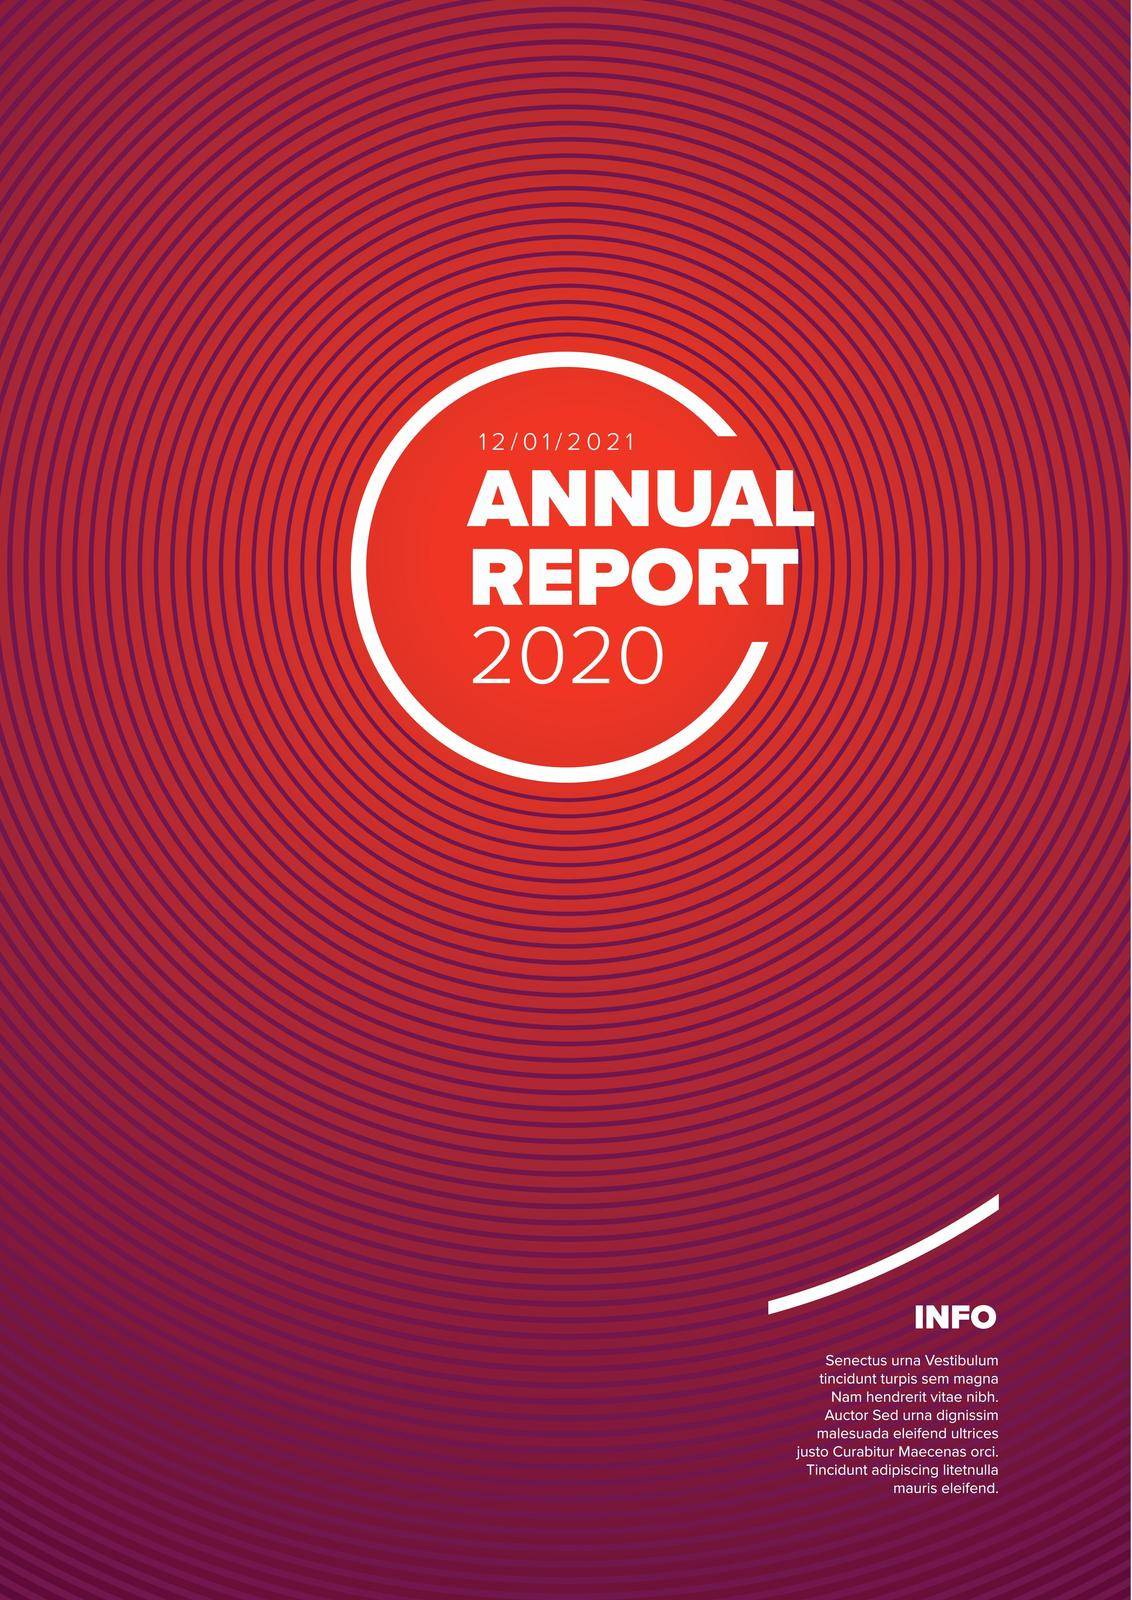 Vector abstract annual report cover template with sample text and abstract circle pattern - simple minimalistic layout for brochure cover, flyer or document front page